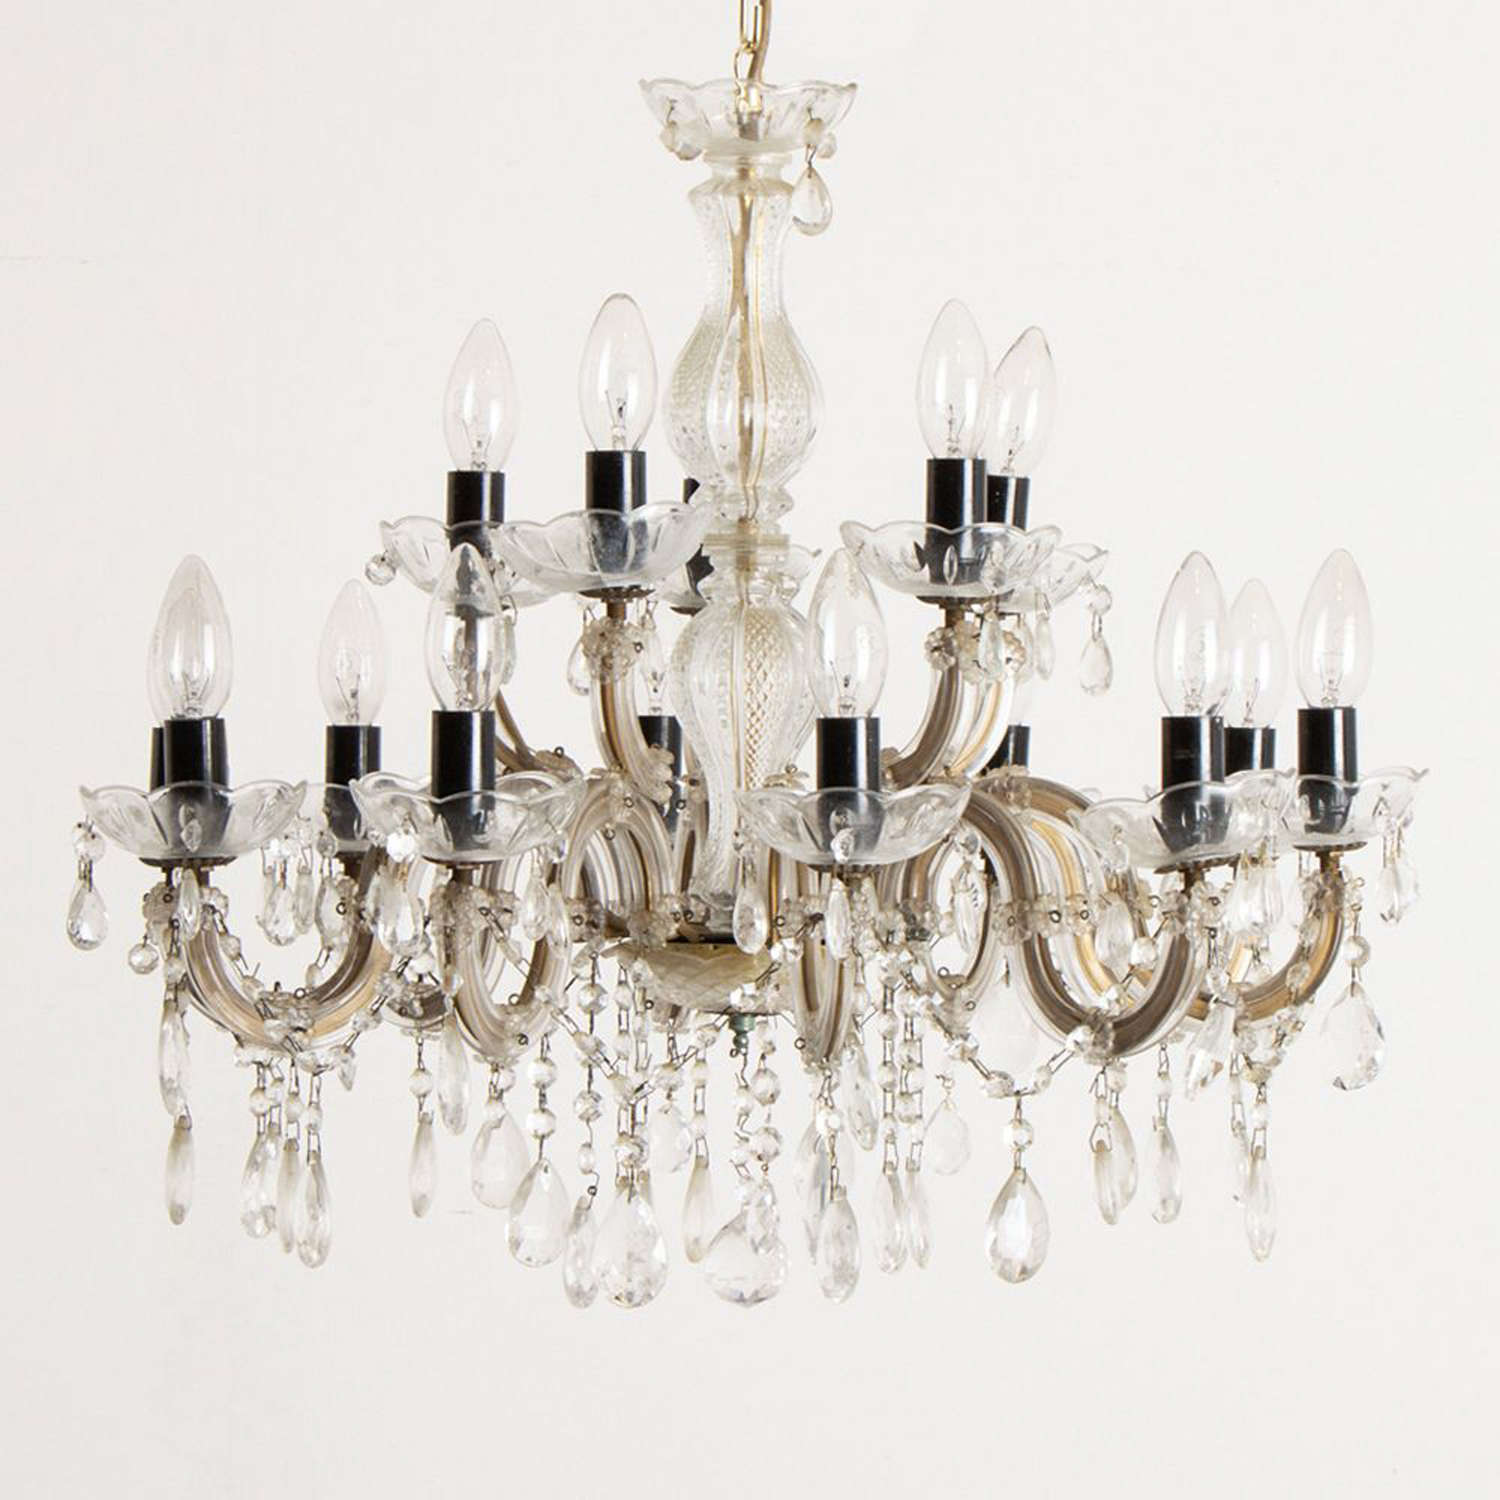 A large 1950's Maria Theresa 15 branch chandelier